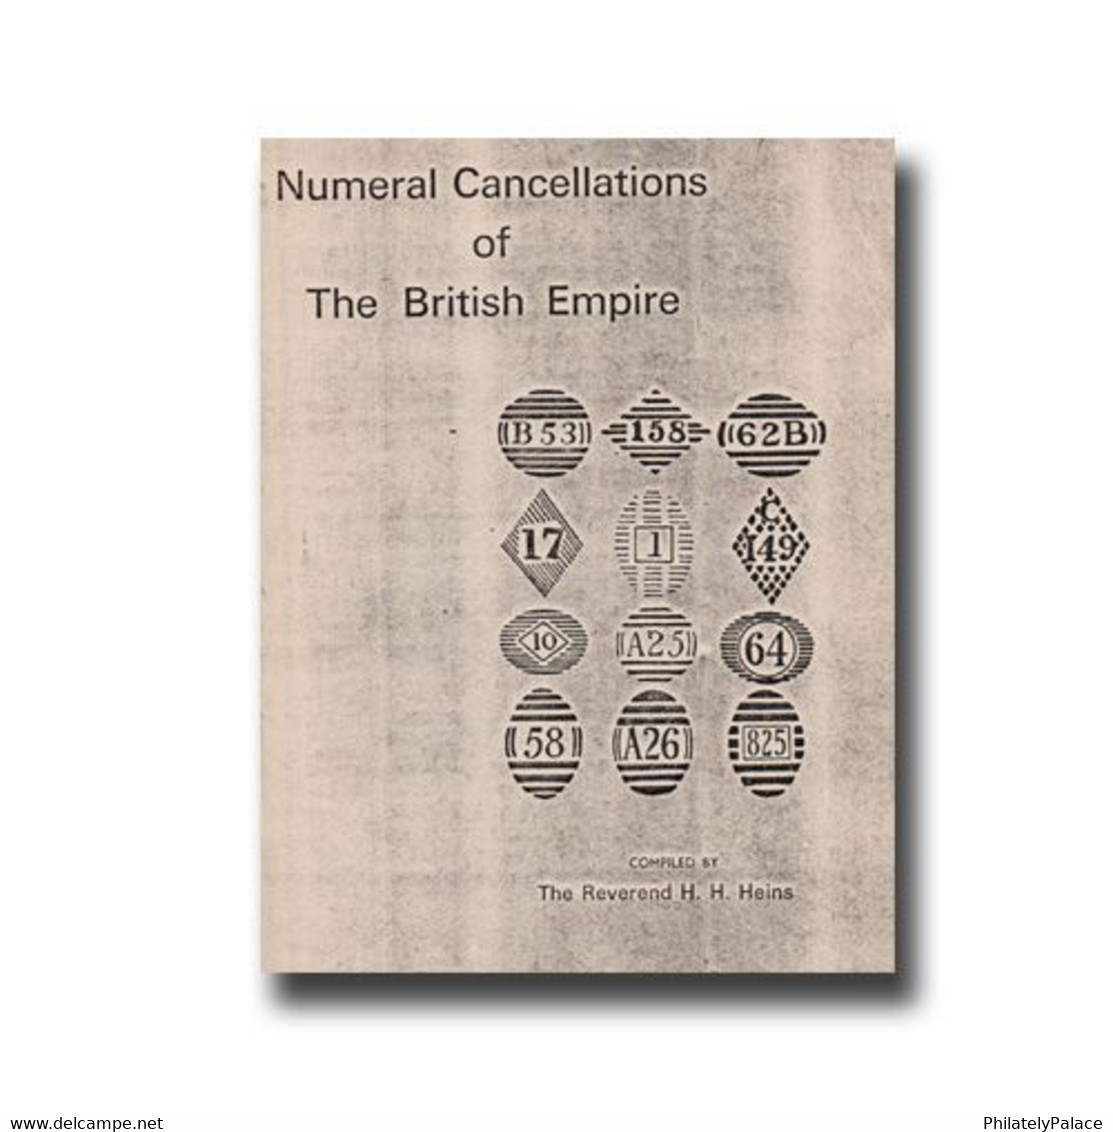 Numeral Cancellations Of British Empire By H.H.Heins -Photocopy Xerox Paper BacK(**) Limited Issue - Philately And Postal History